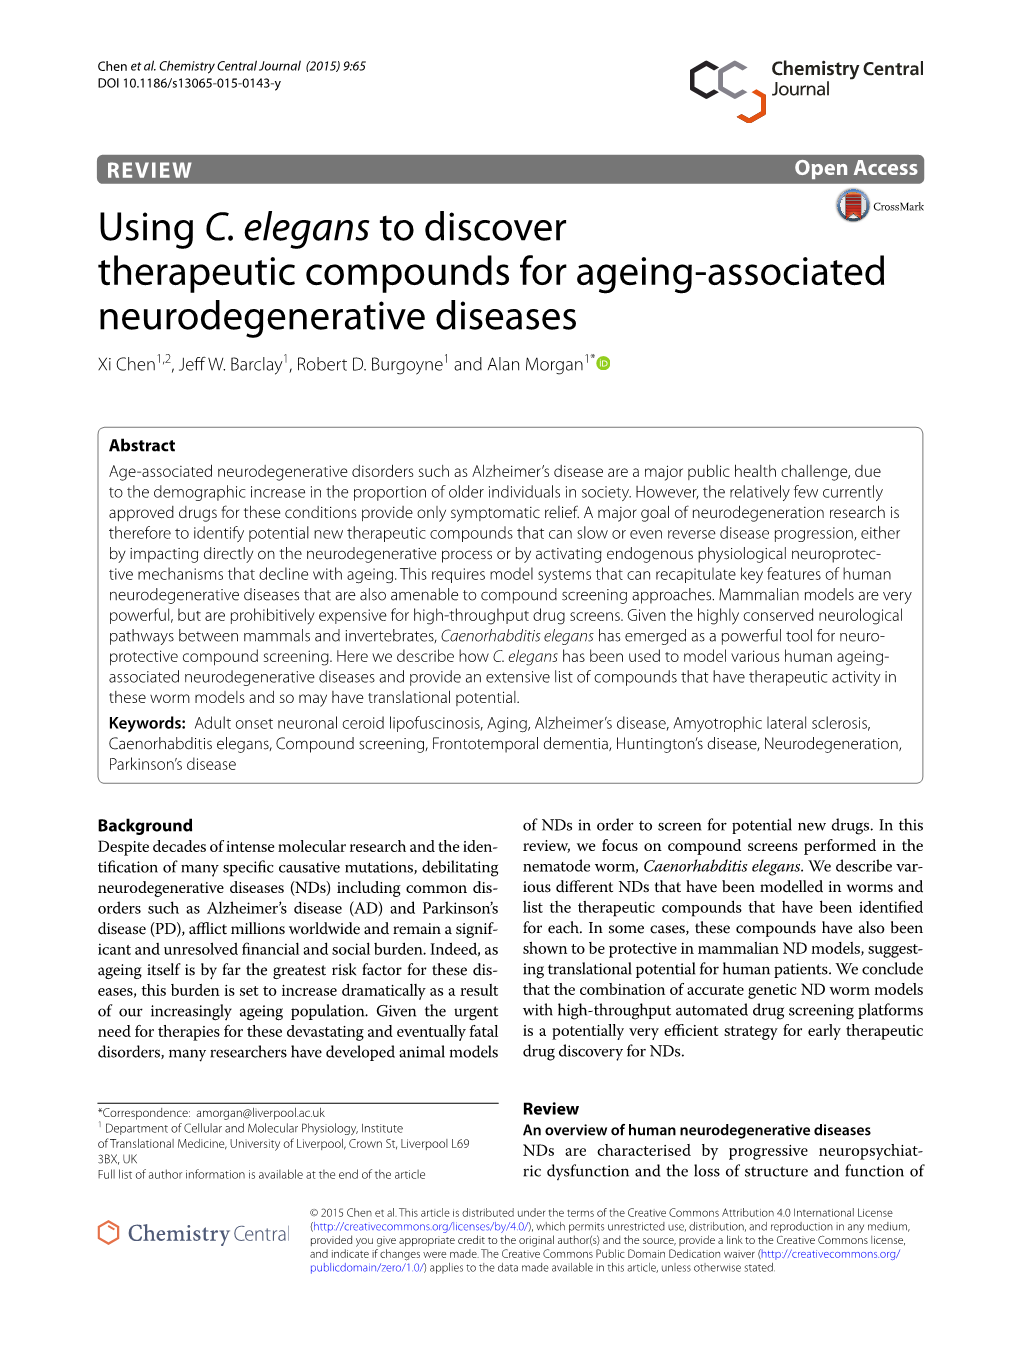 Using C. Elegans to Discover Therapeutic Compounds for Ageing-Associated Neurodegenerative Diseases